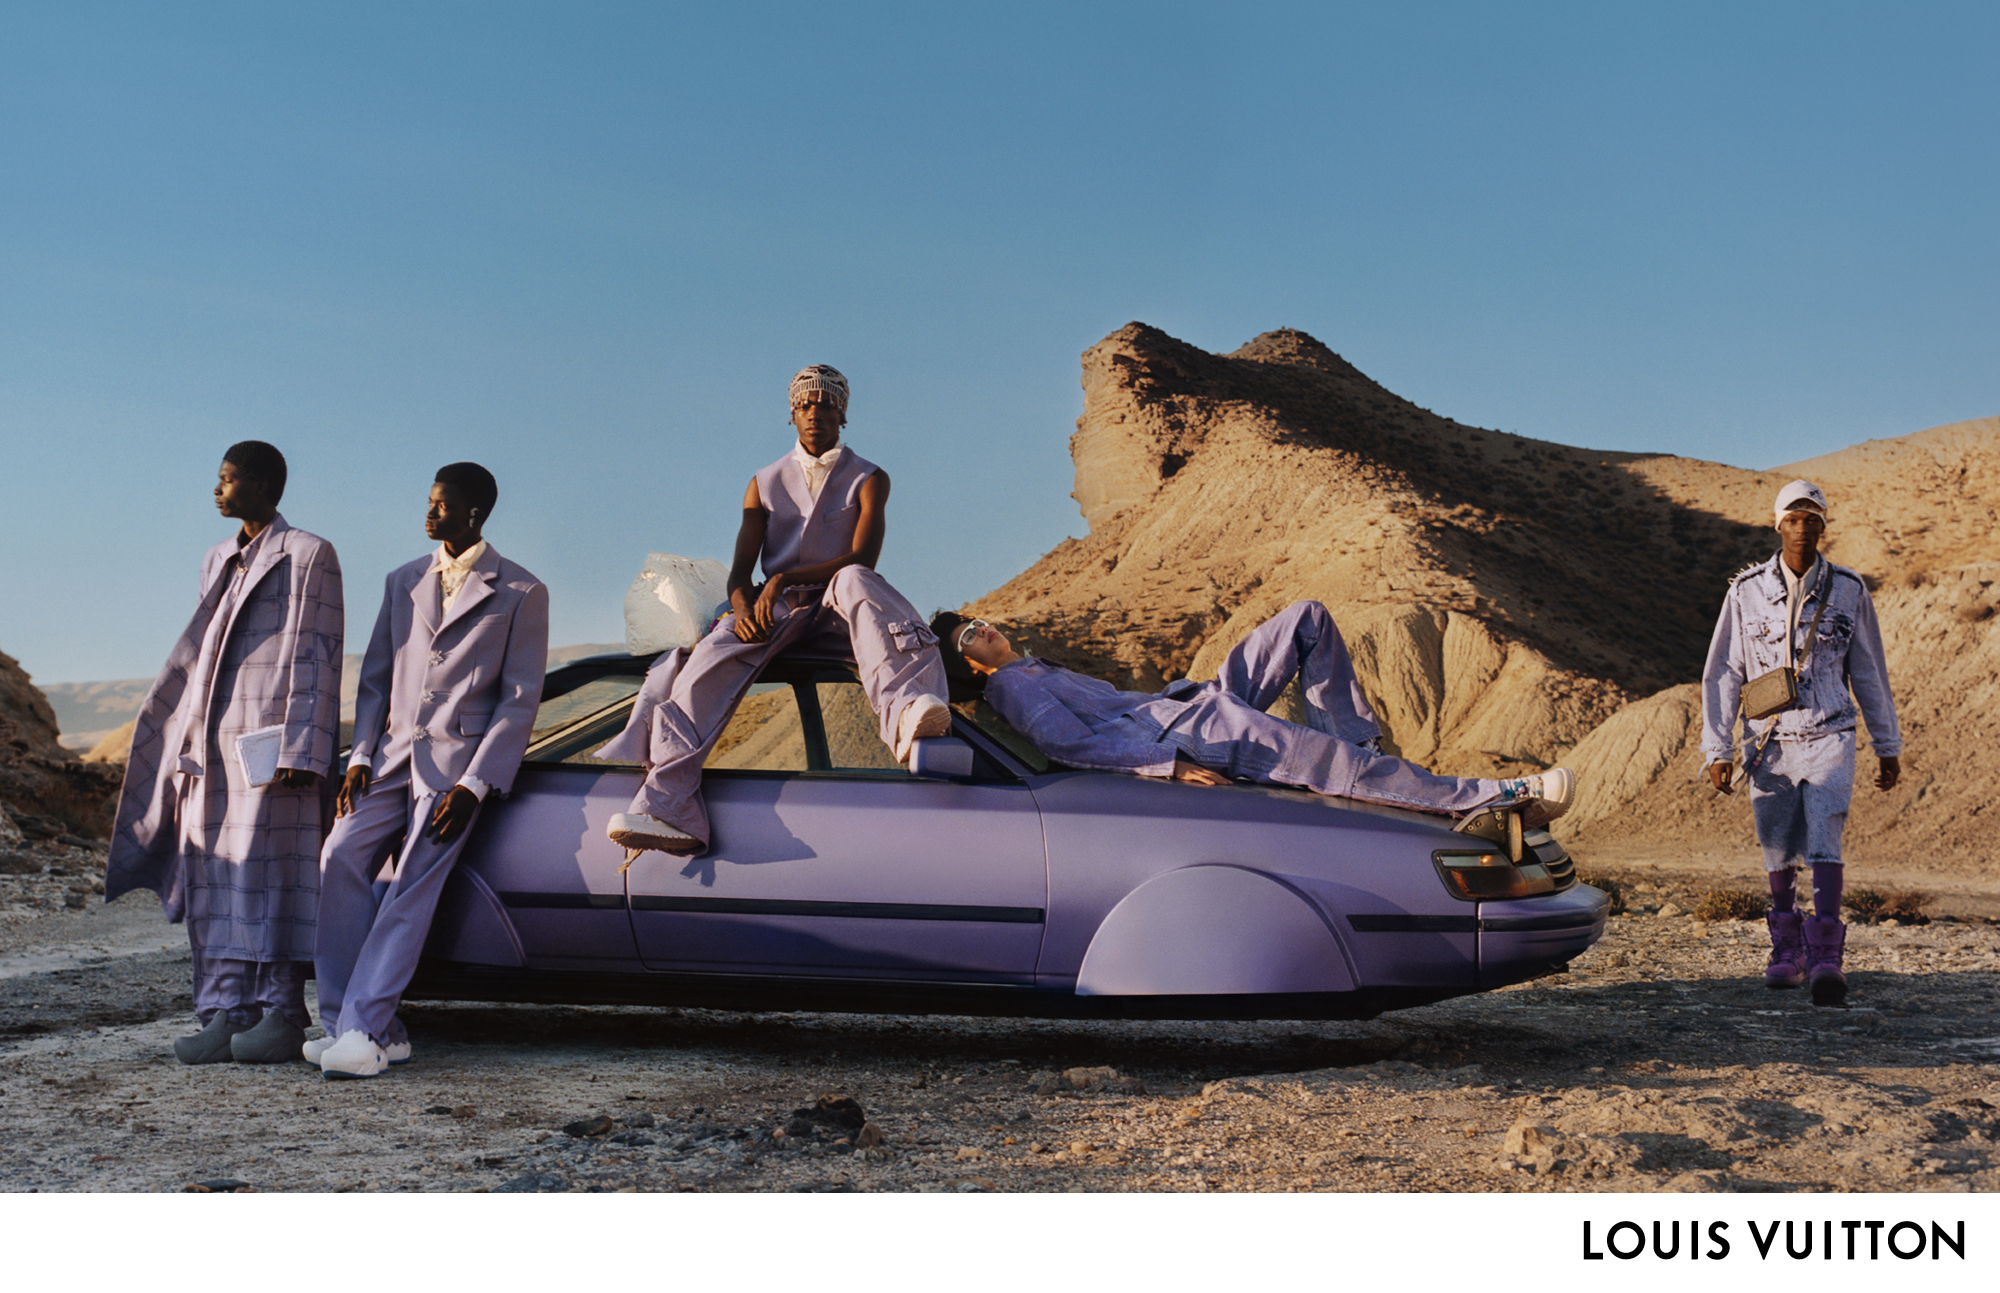 Louis Vuitton SS19 Phase II Campaign - Be Good Studios